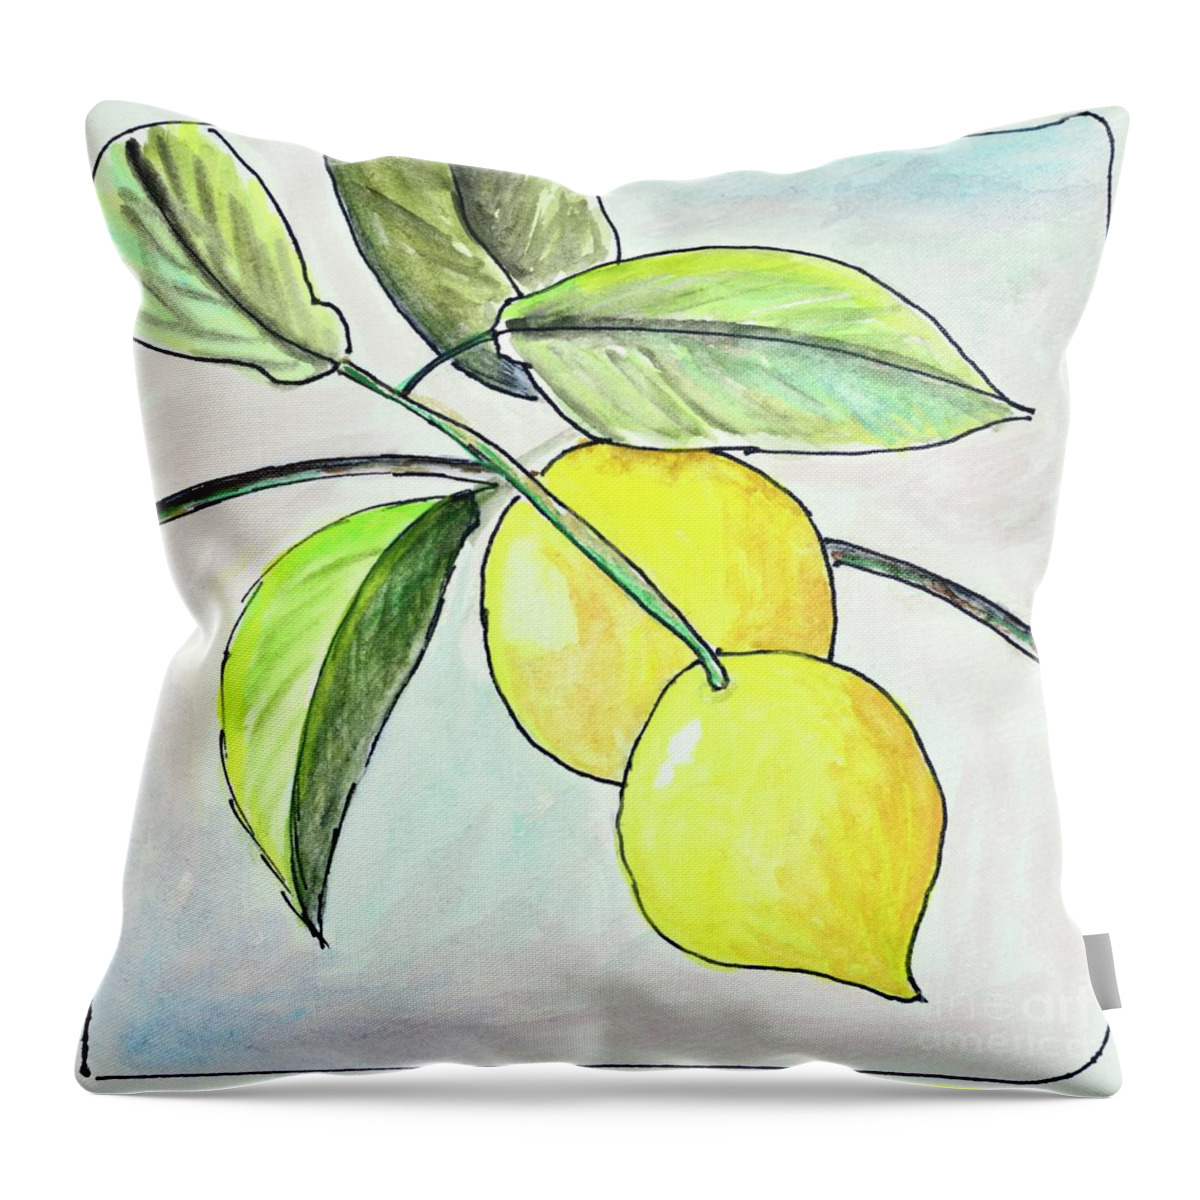 Lemon Throw Pillow featuring the painting California Lemons by Mary Scott